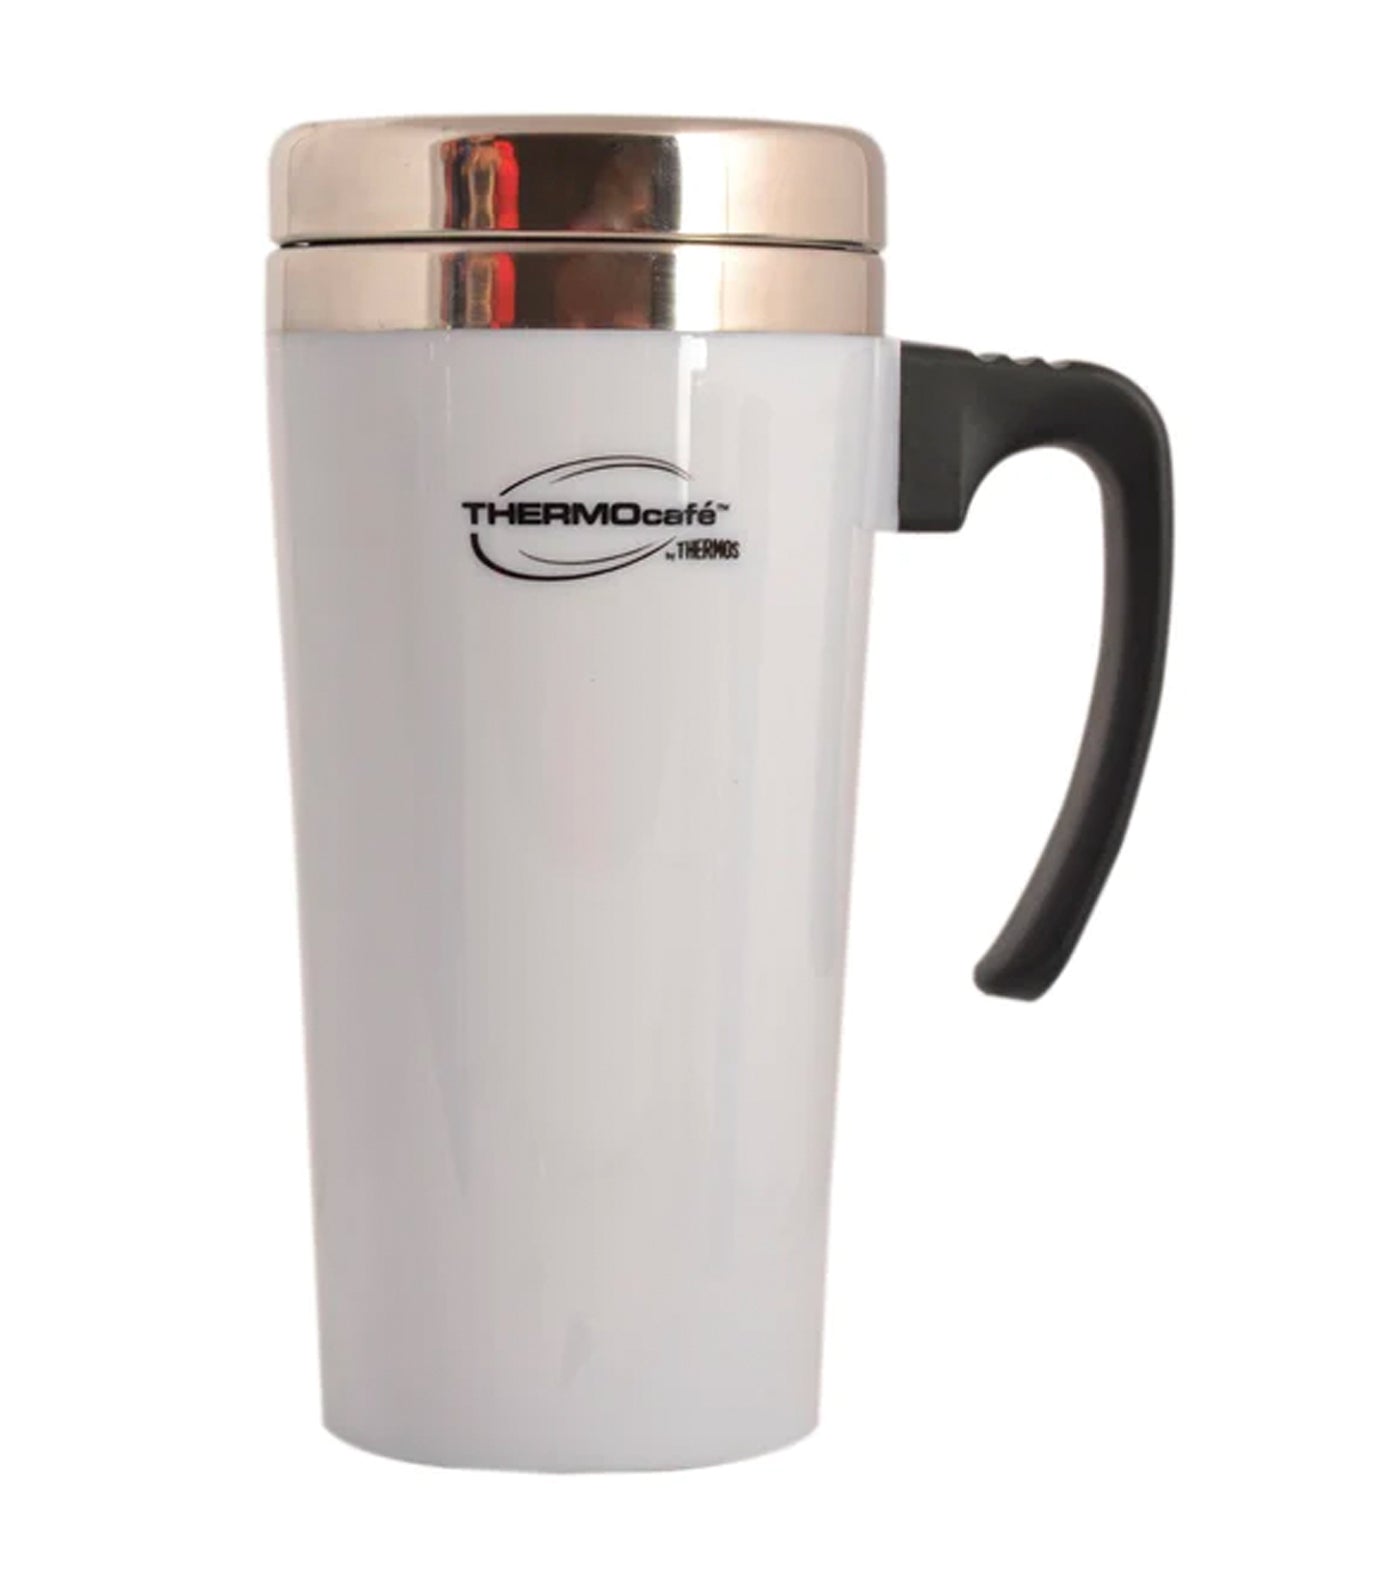 Thermos ThermoCafe 450ml Thermal Desk Mug - Red